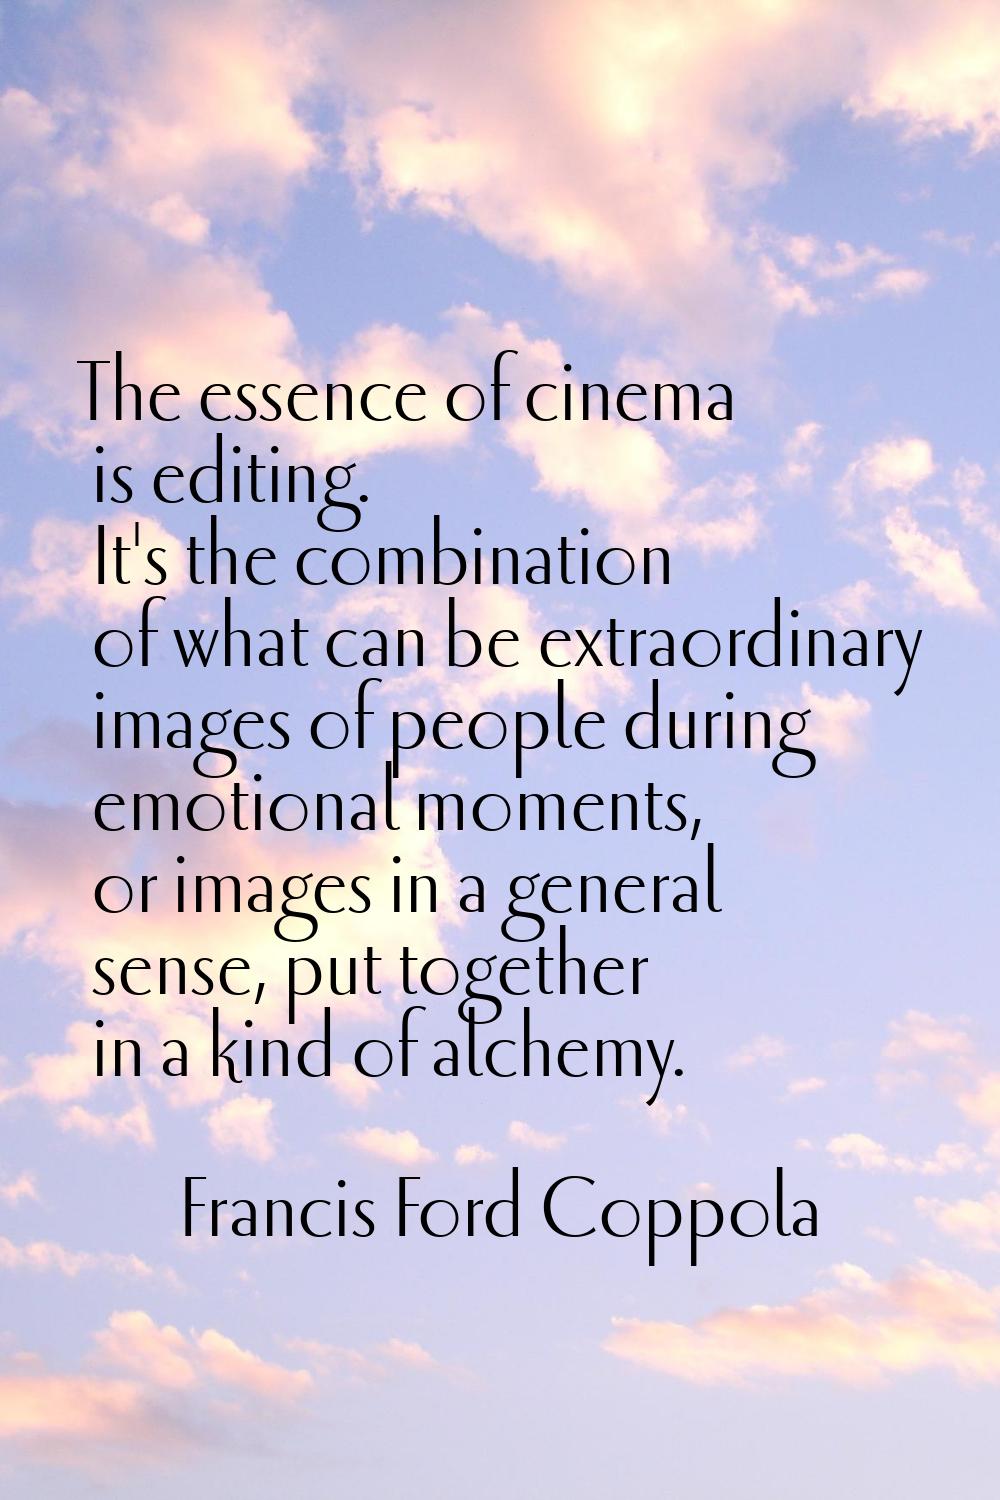 The essence of cinema is editing. It's the combination of what can be extraordinary images of peopl